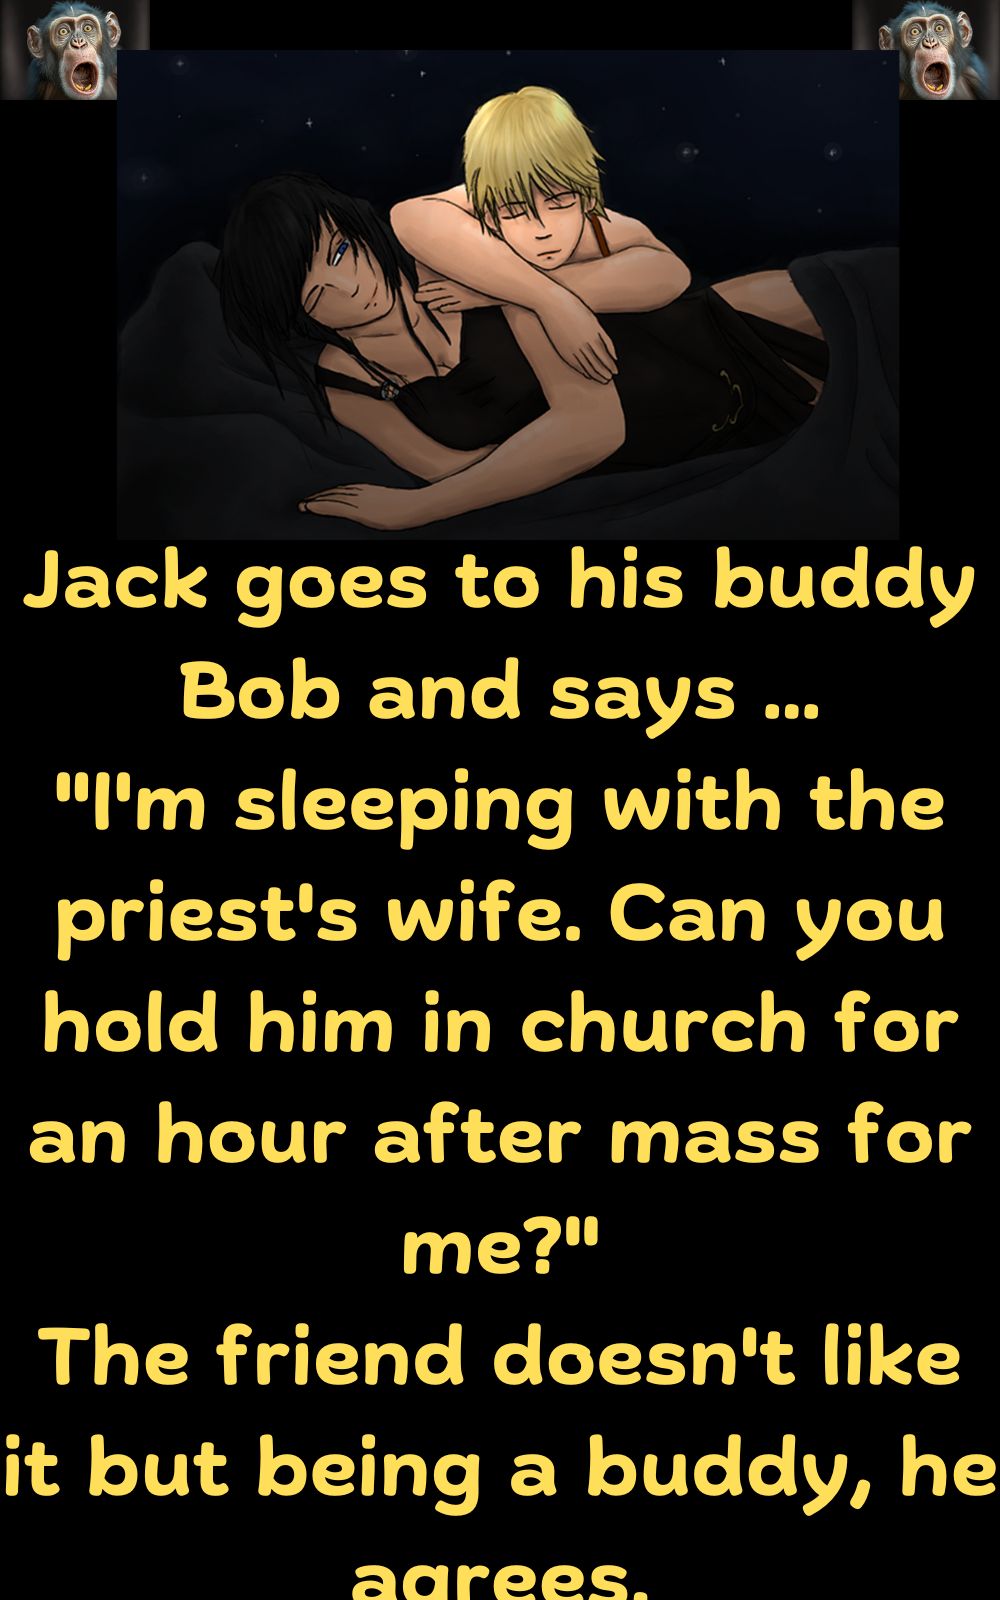 Man sleeping with the priest's wife